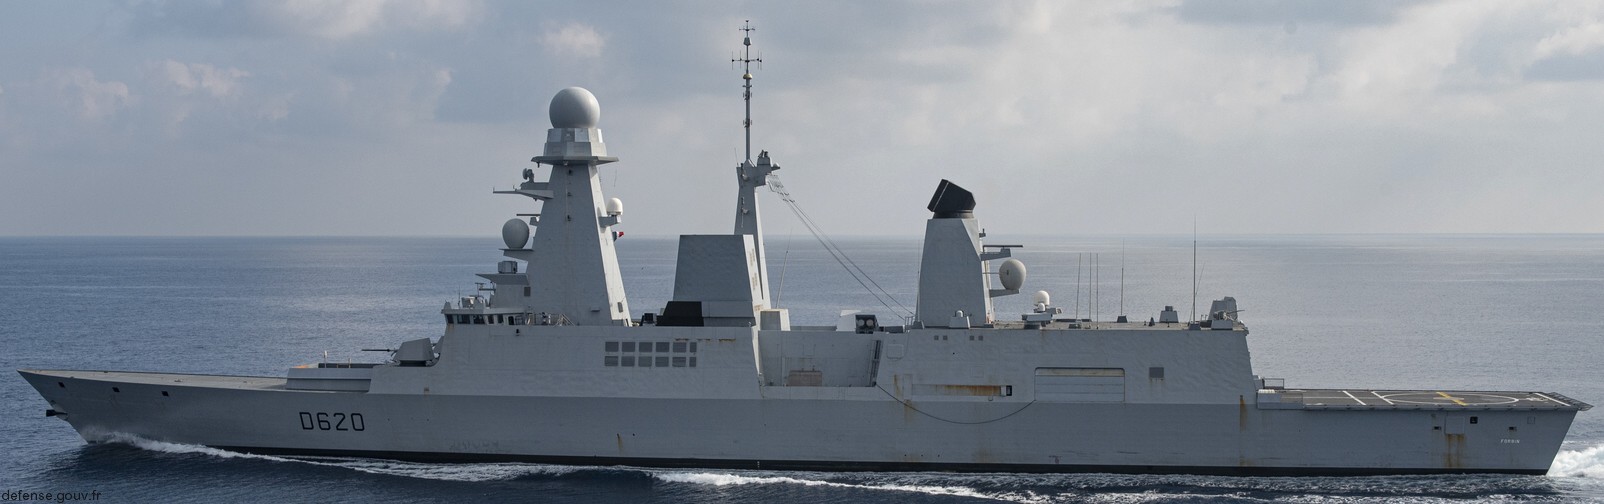 d-620 fs forbin horizon class guided missile frigate anti-air-warfare aaw ffgh french navy marine nationale 25